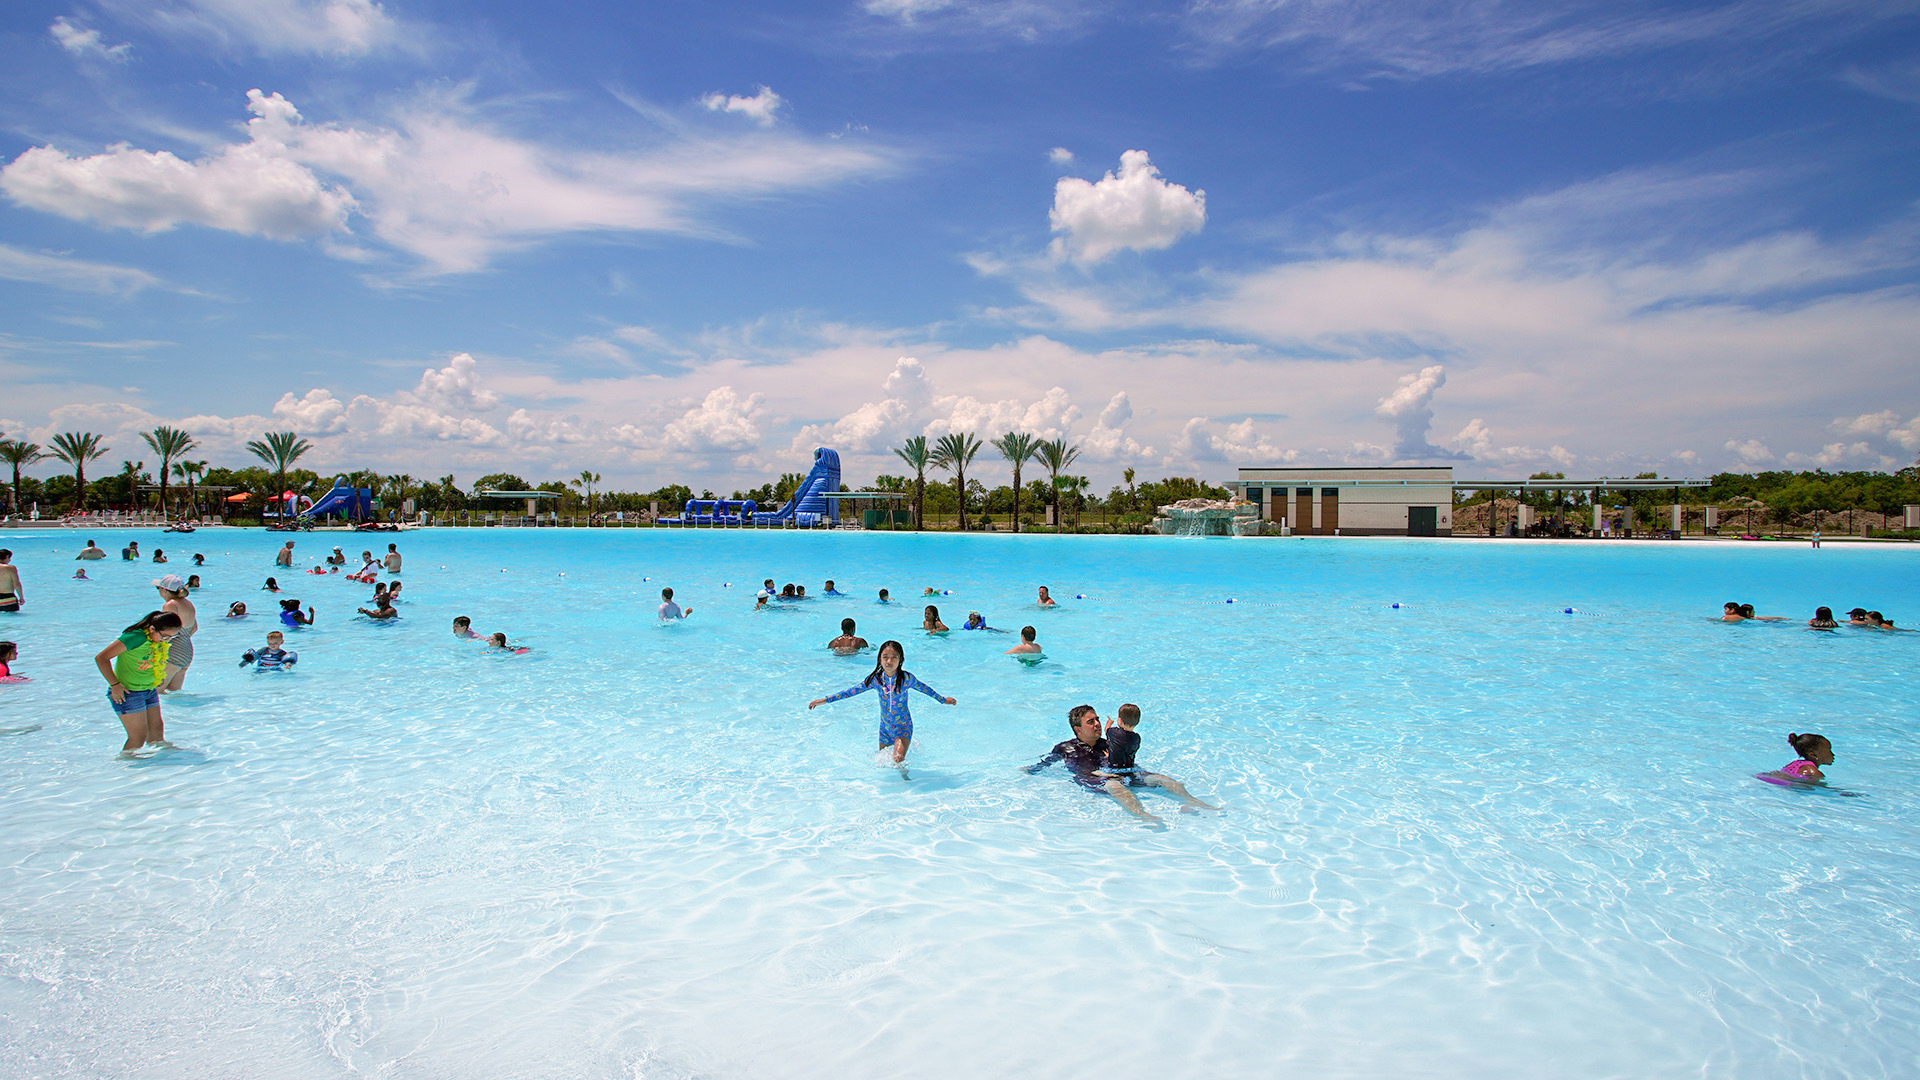 Houstons Largest Crystal Clear Lagoon In Texas Opens To Public For